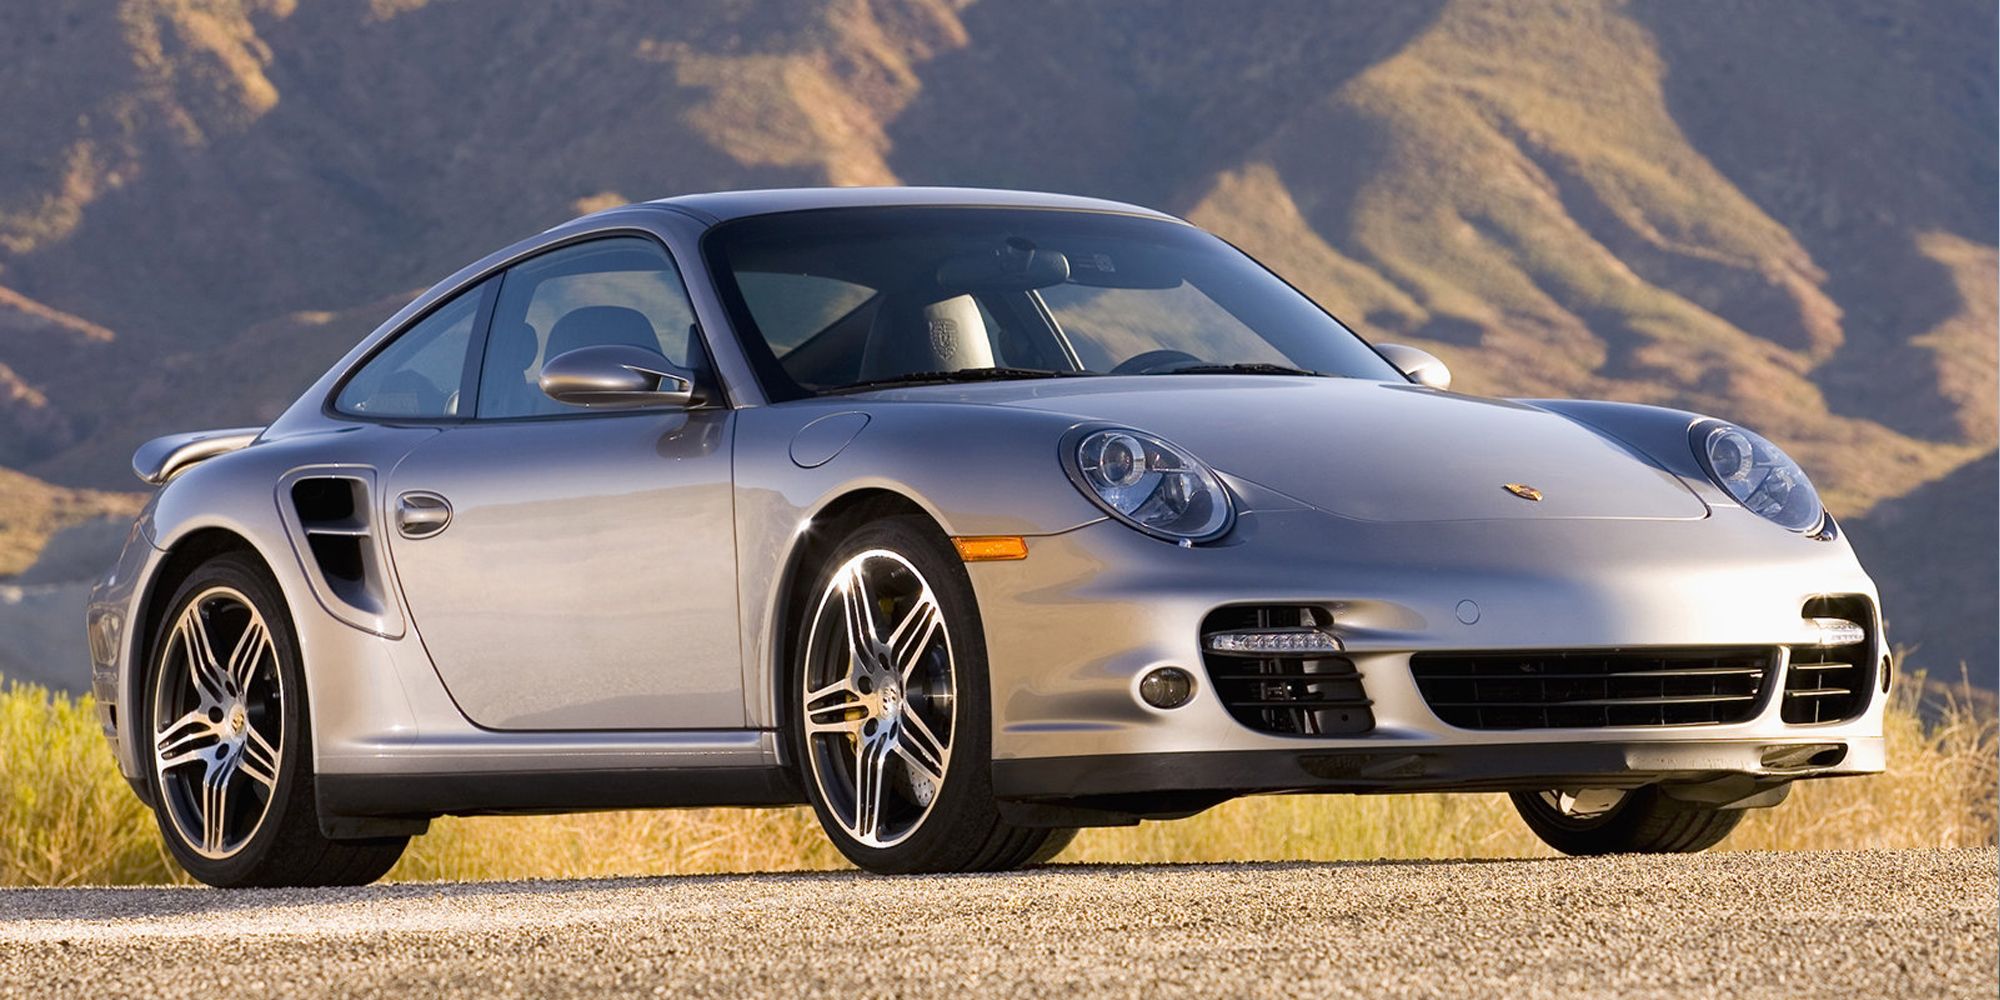 The front of the 997 911 Turbo 